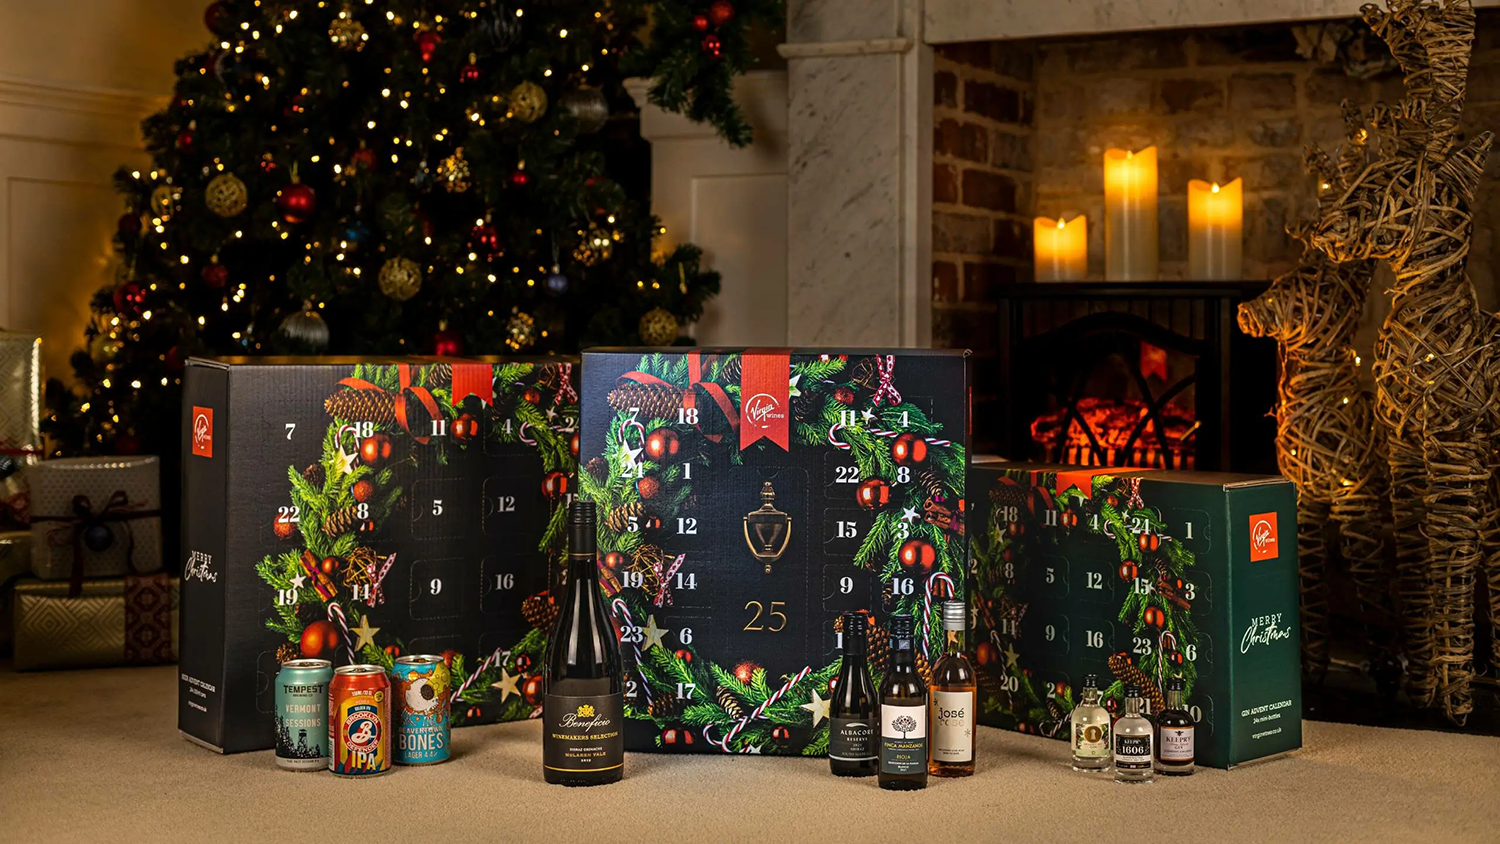 Three Virgin Wines alcohol advent calendars in front of a Christmassy scene